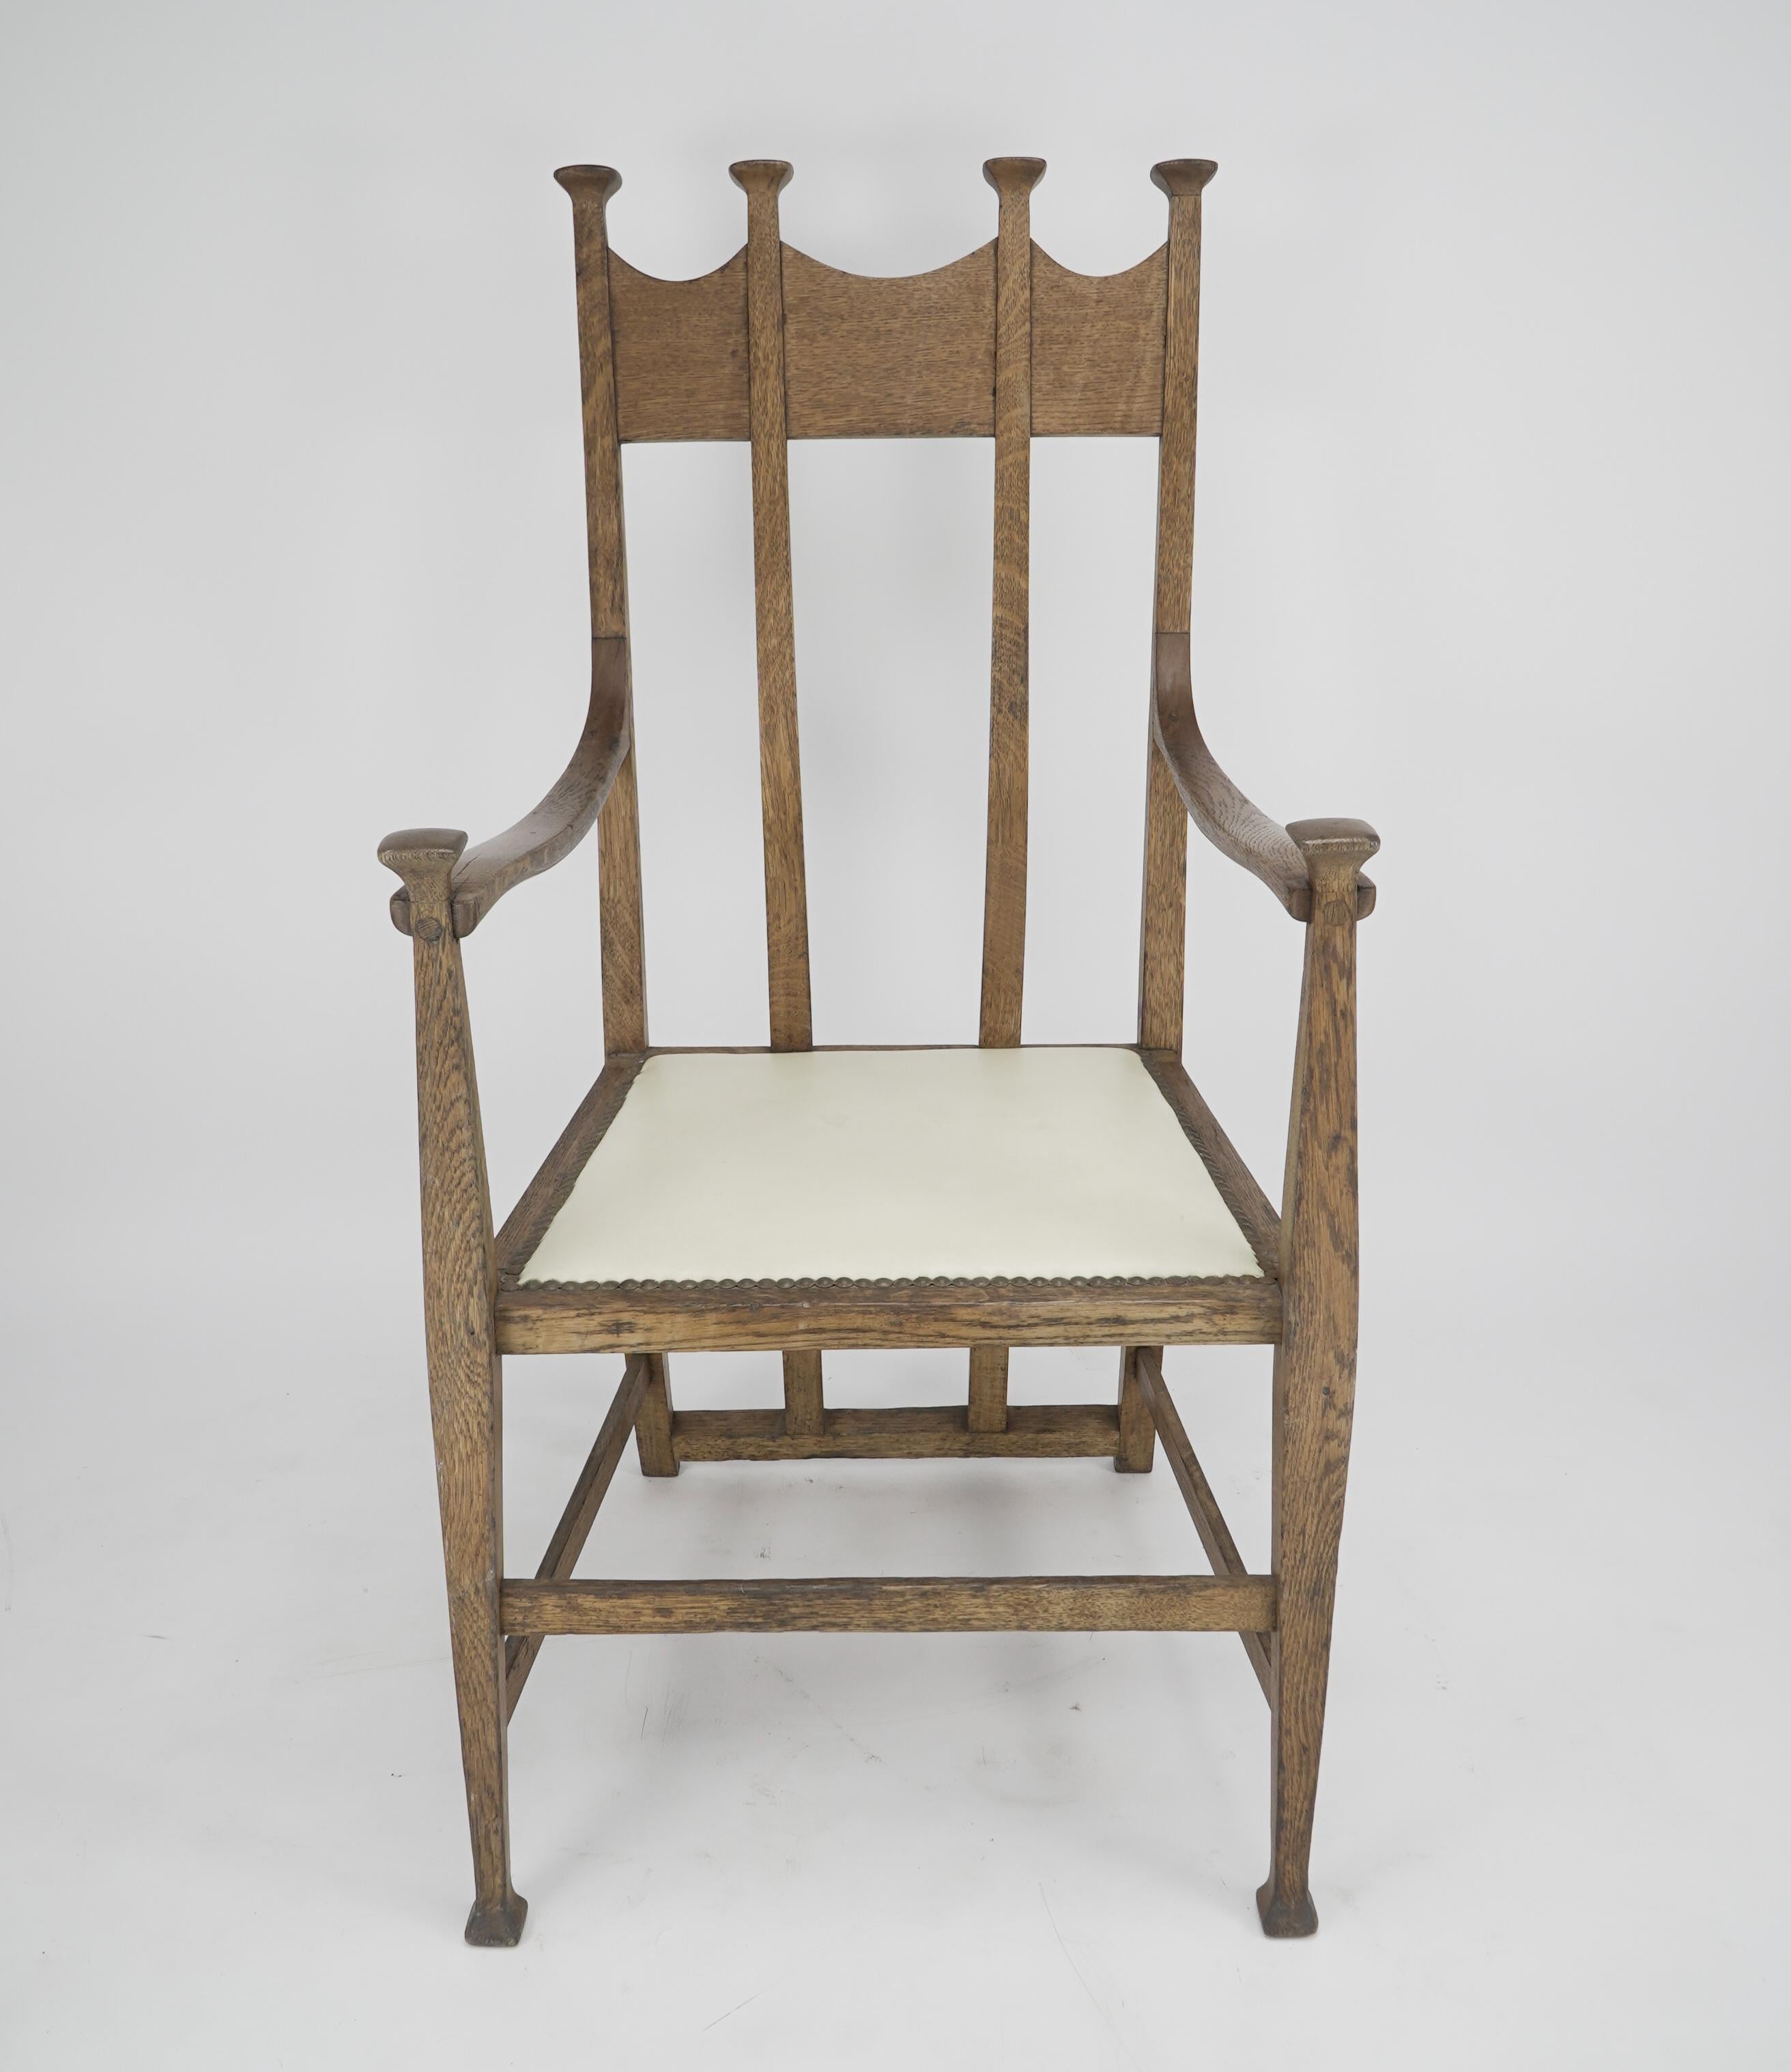 George Montague Ellwood. Made by J S Henry.
An Arts & Crafts oak throne armchair with capped finials and wonderful sweeping back supports, on tapering square legs.